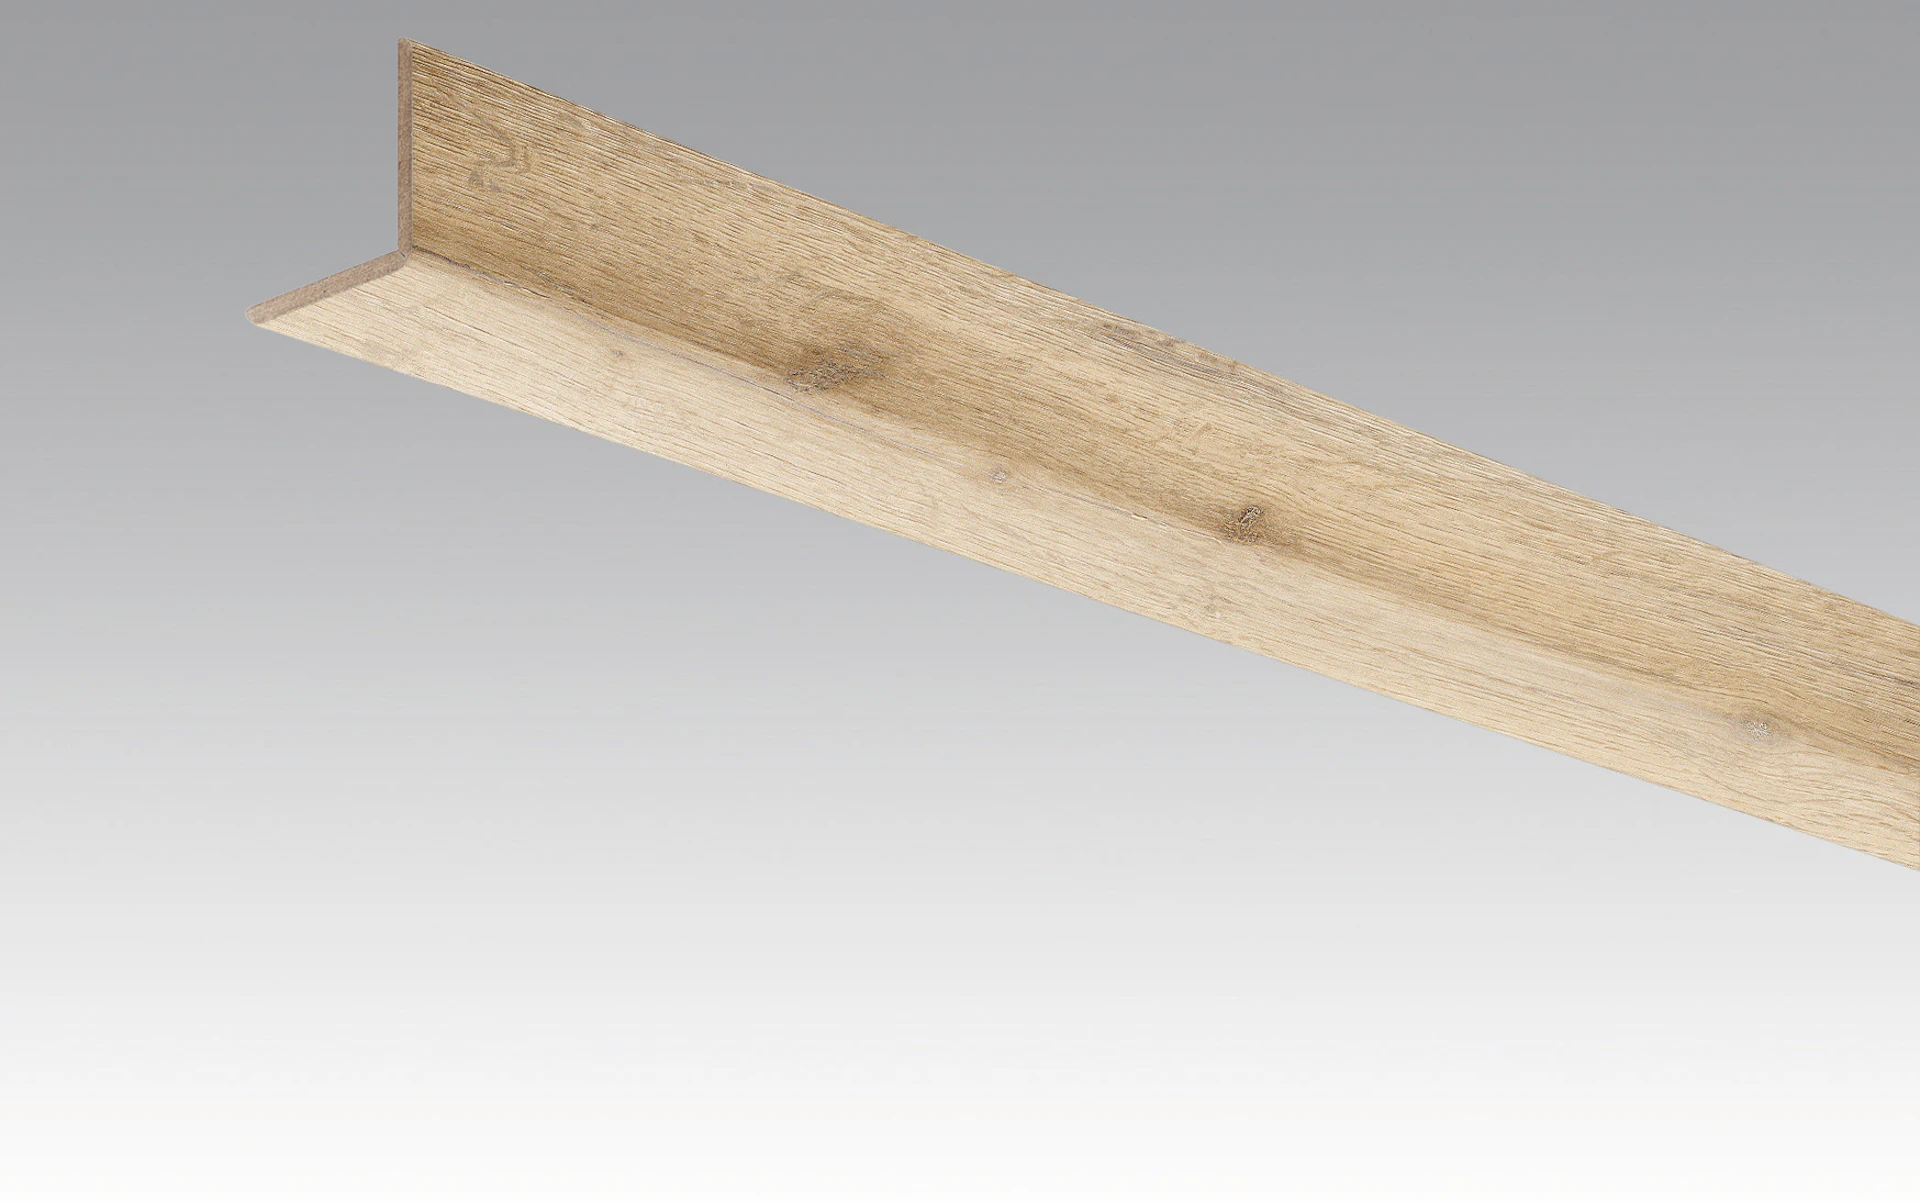 MEISTER skirting boards angle skirting rustic oak 4083 - 2380 x 33 x 3.5 mm (200035-2380-04083)